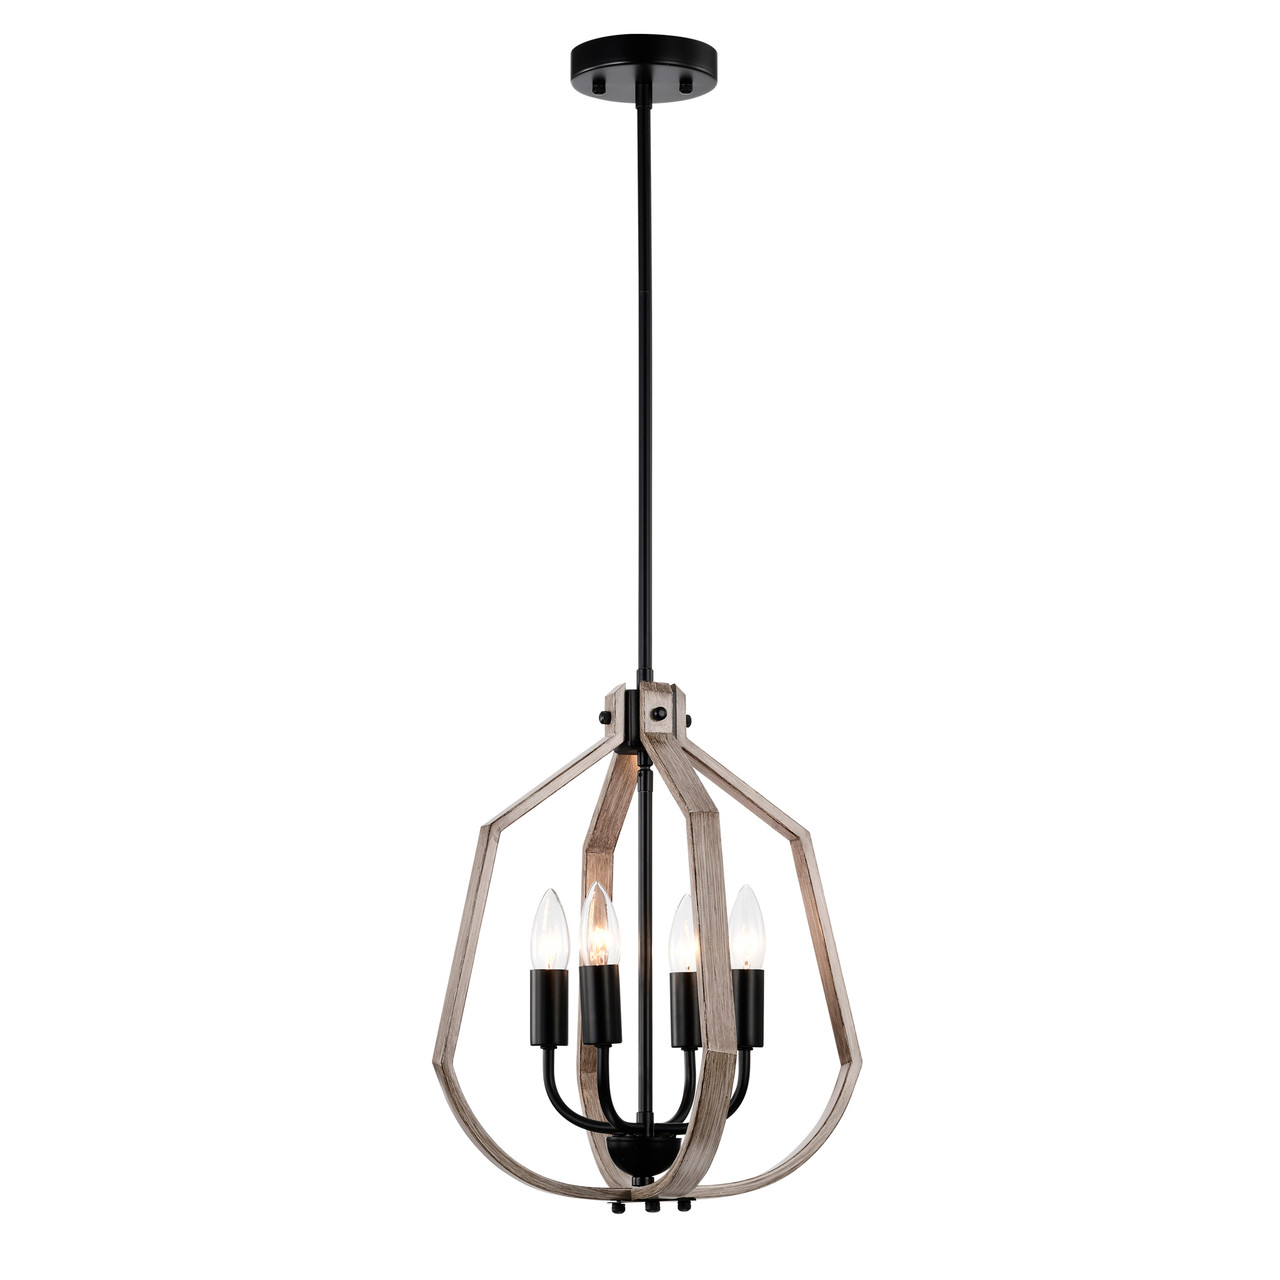 WAREHOUSE OF TIFFANY GD01-06MW Netu 14 in. 4-Light Indoor Matte Black and Faux Wood Grain Finish Chandelier with Light Kit